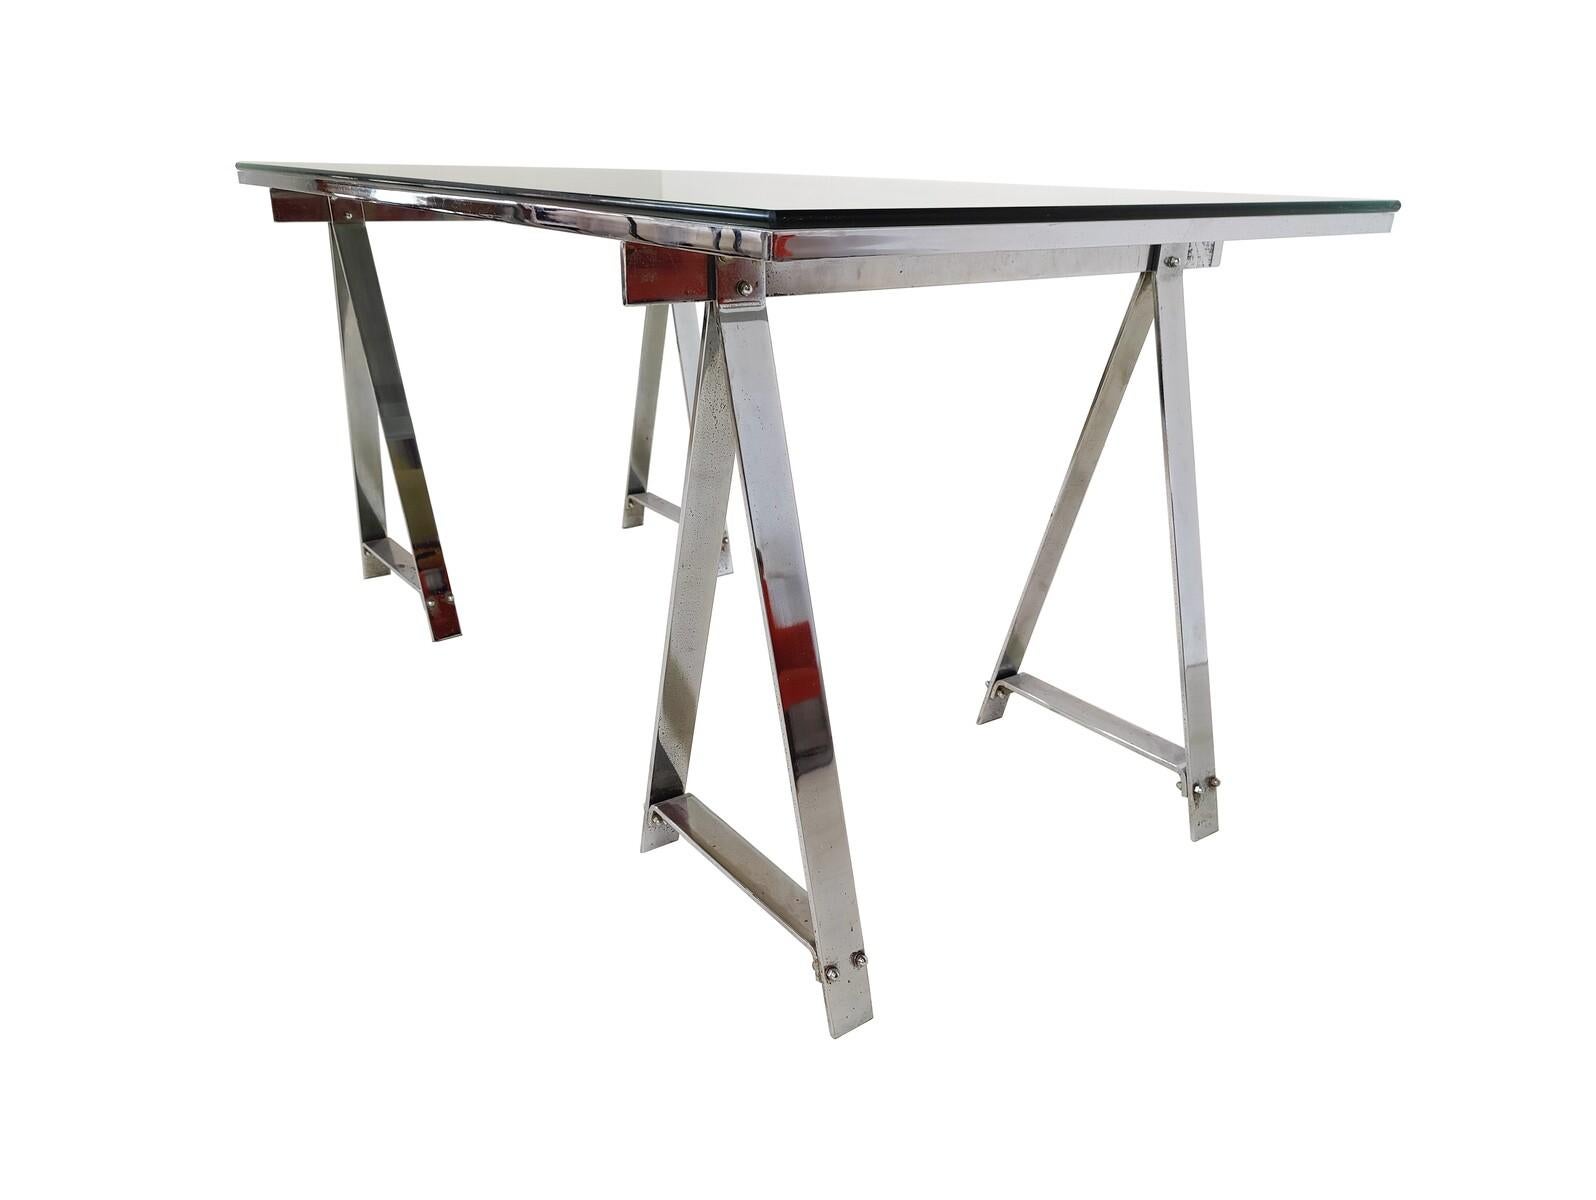 Late 20th Century Mid-Century Modern Dining Table/Desk, Chrome and Glass, Italy, 1970s For Sale